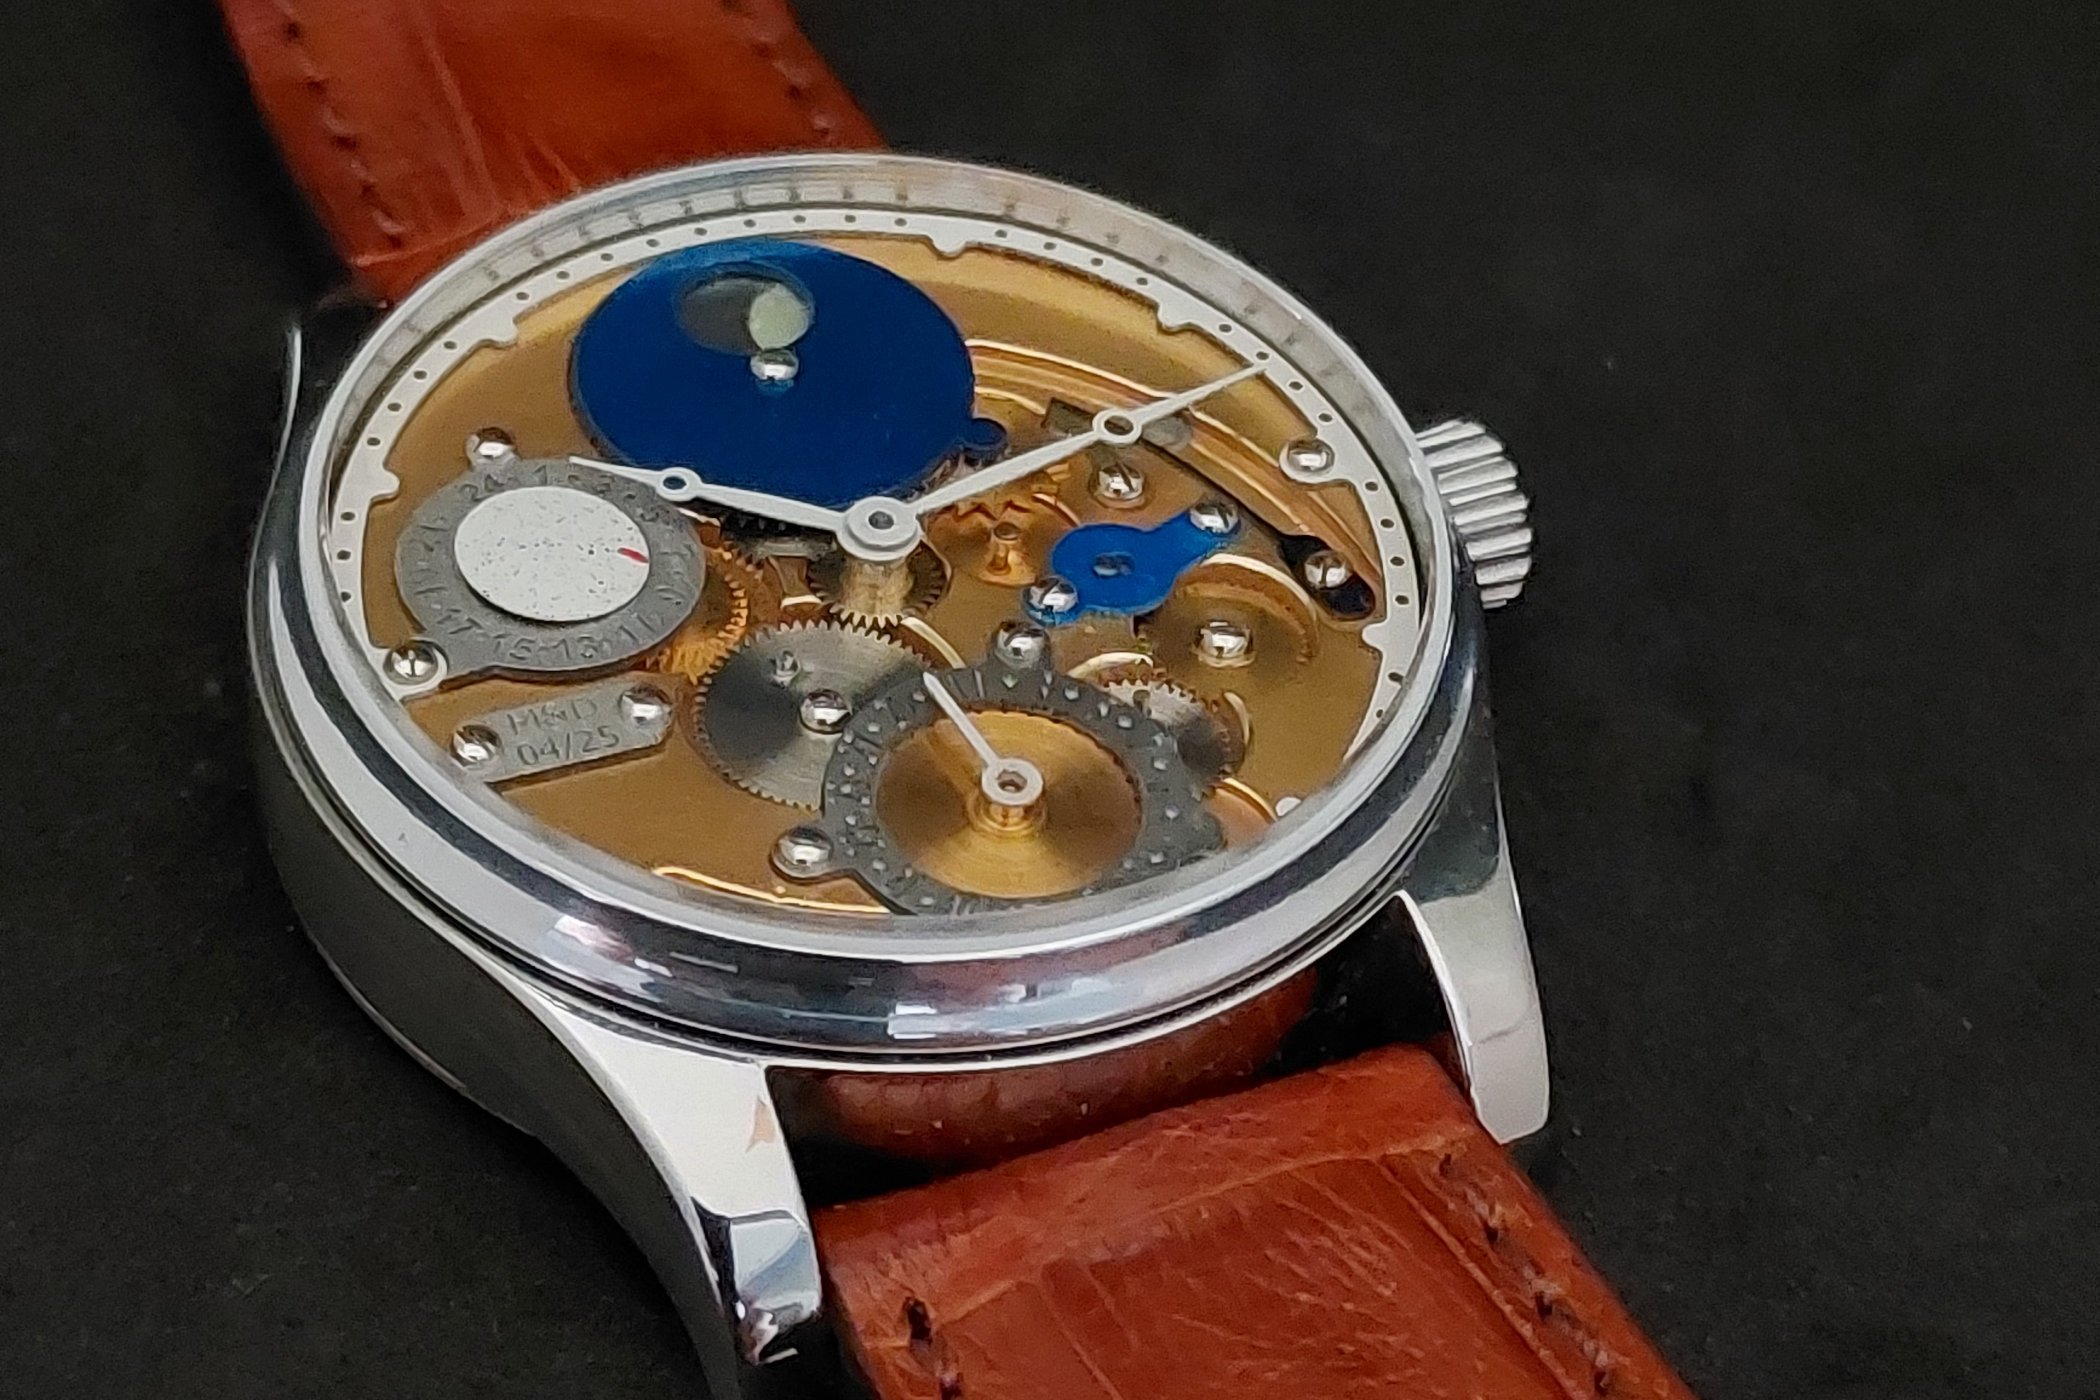 Marc & Darnò - Astronomical Watches - Moon Phase watch with Lunar Day indication - Interview - 1